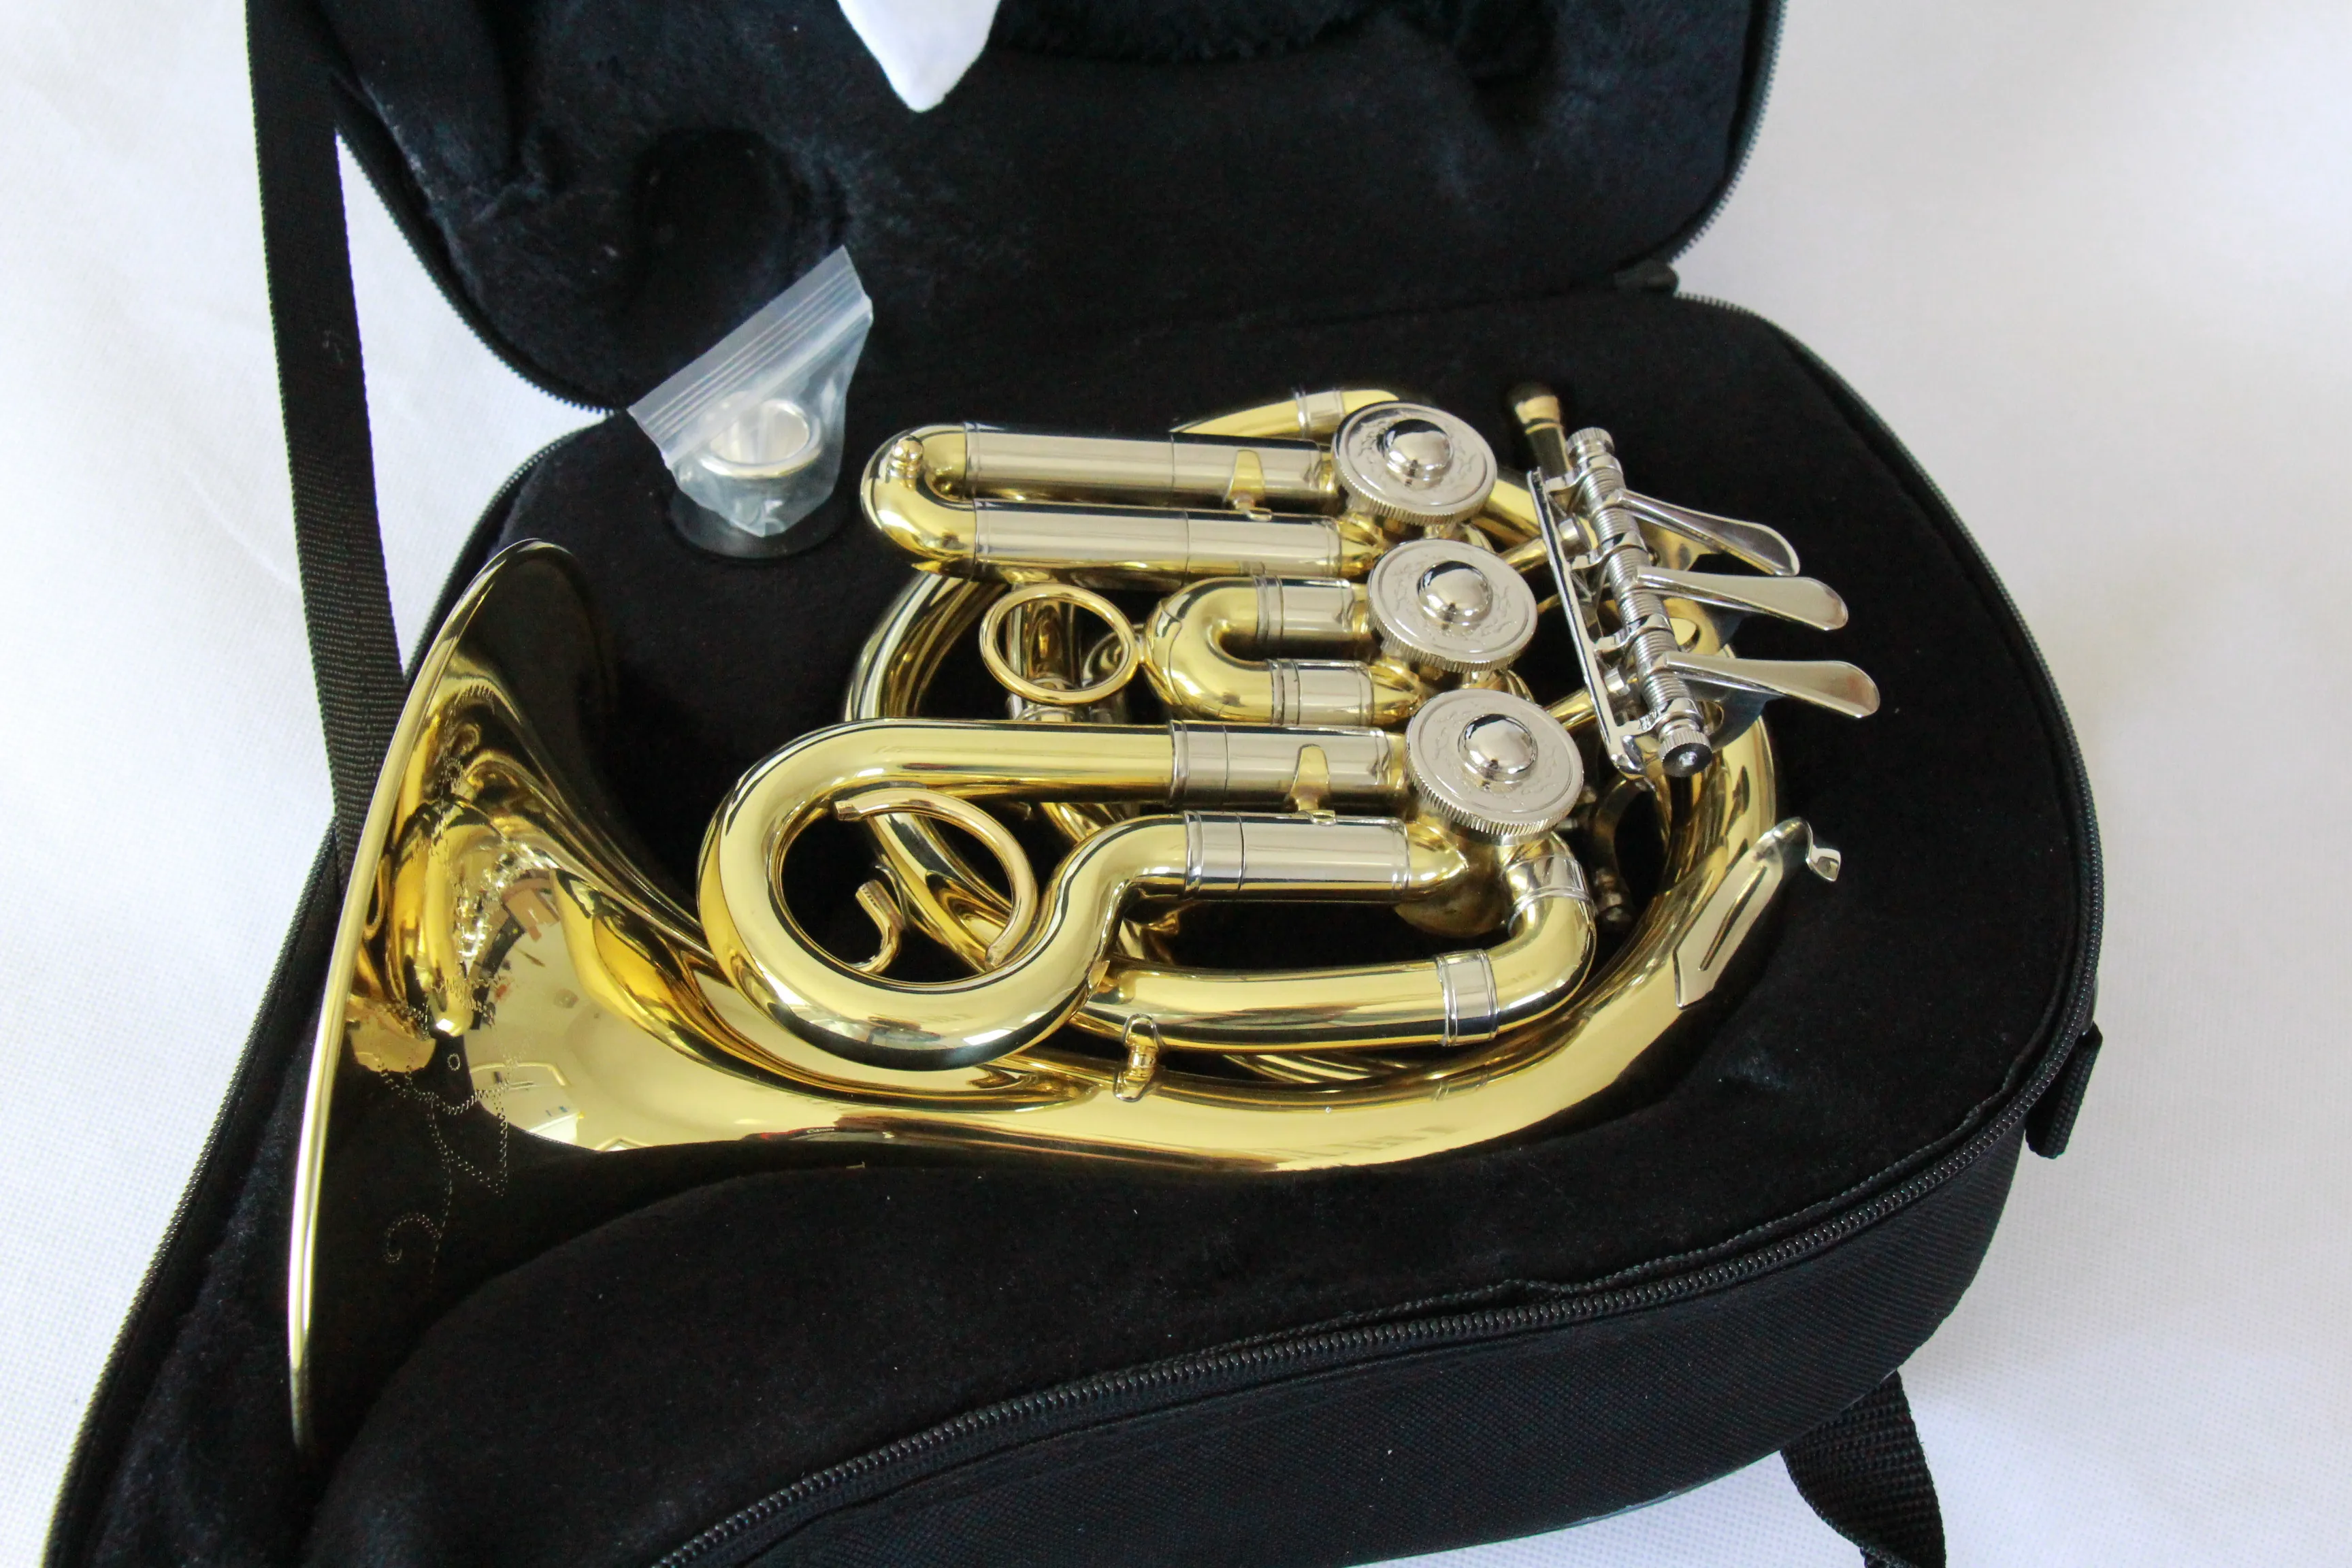 3-key Single French Horn/piccolo French Horn/mini French Horn - Buy Mini  French Horn,Piccolo French Horn,3-key Single French Horn Product on  Alibaba.com